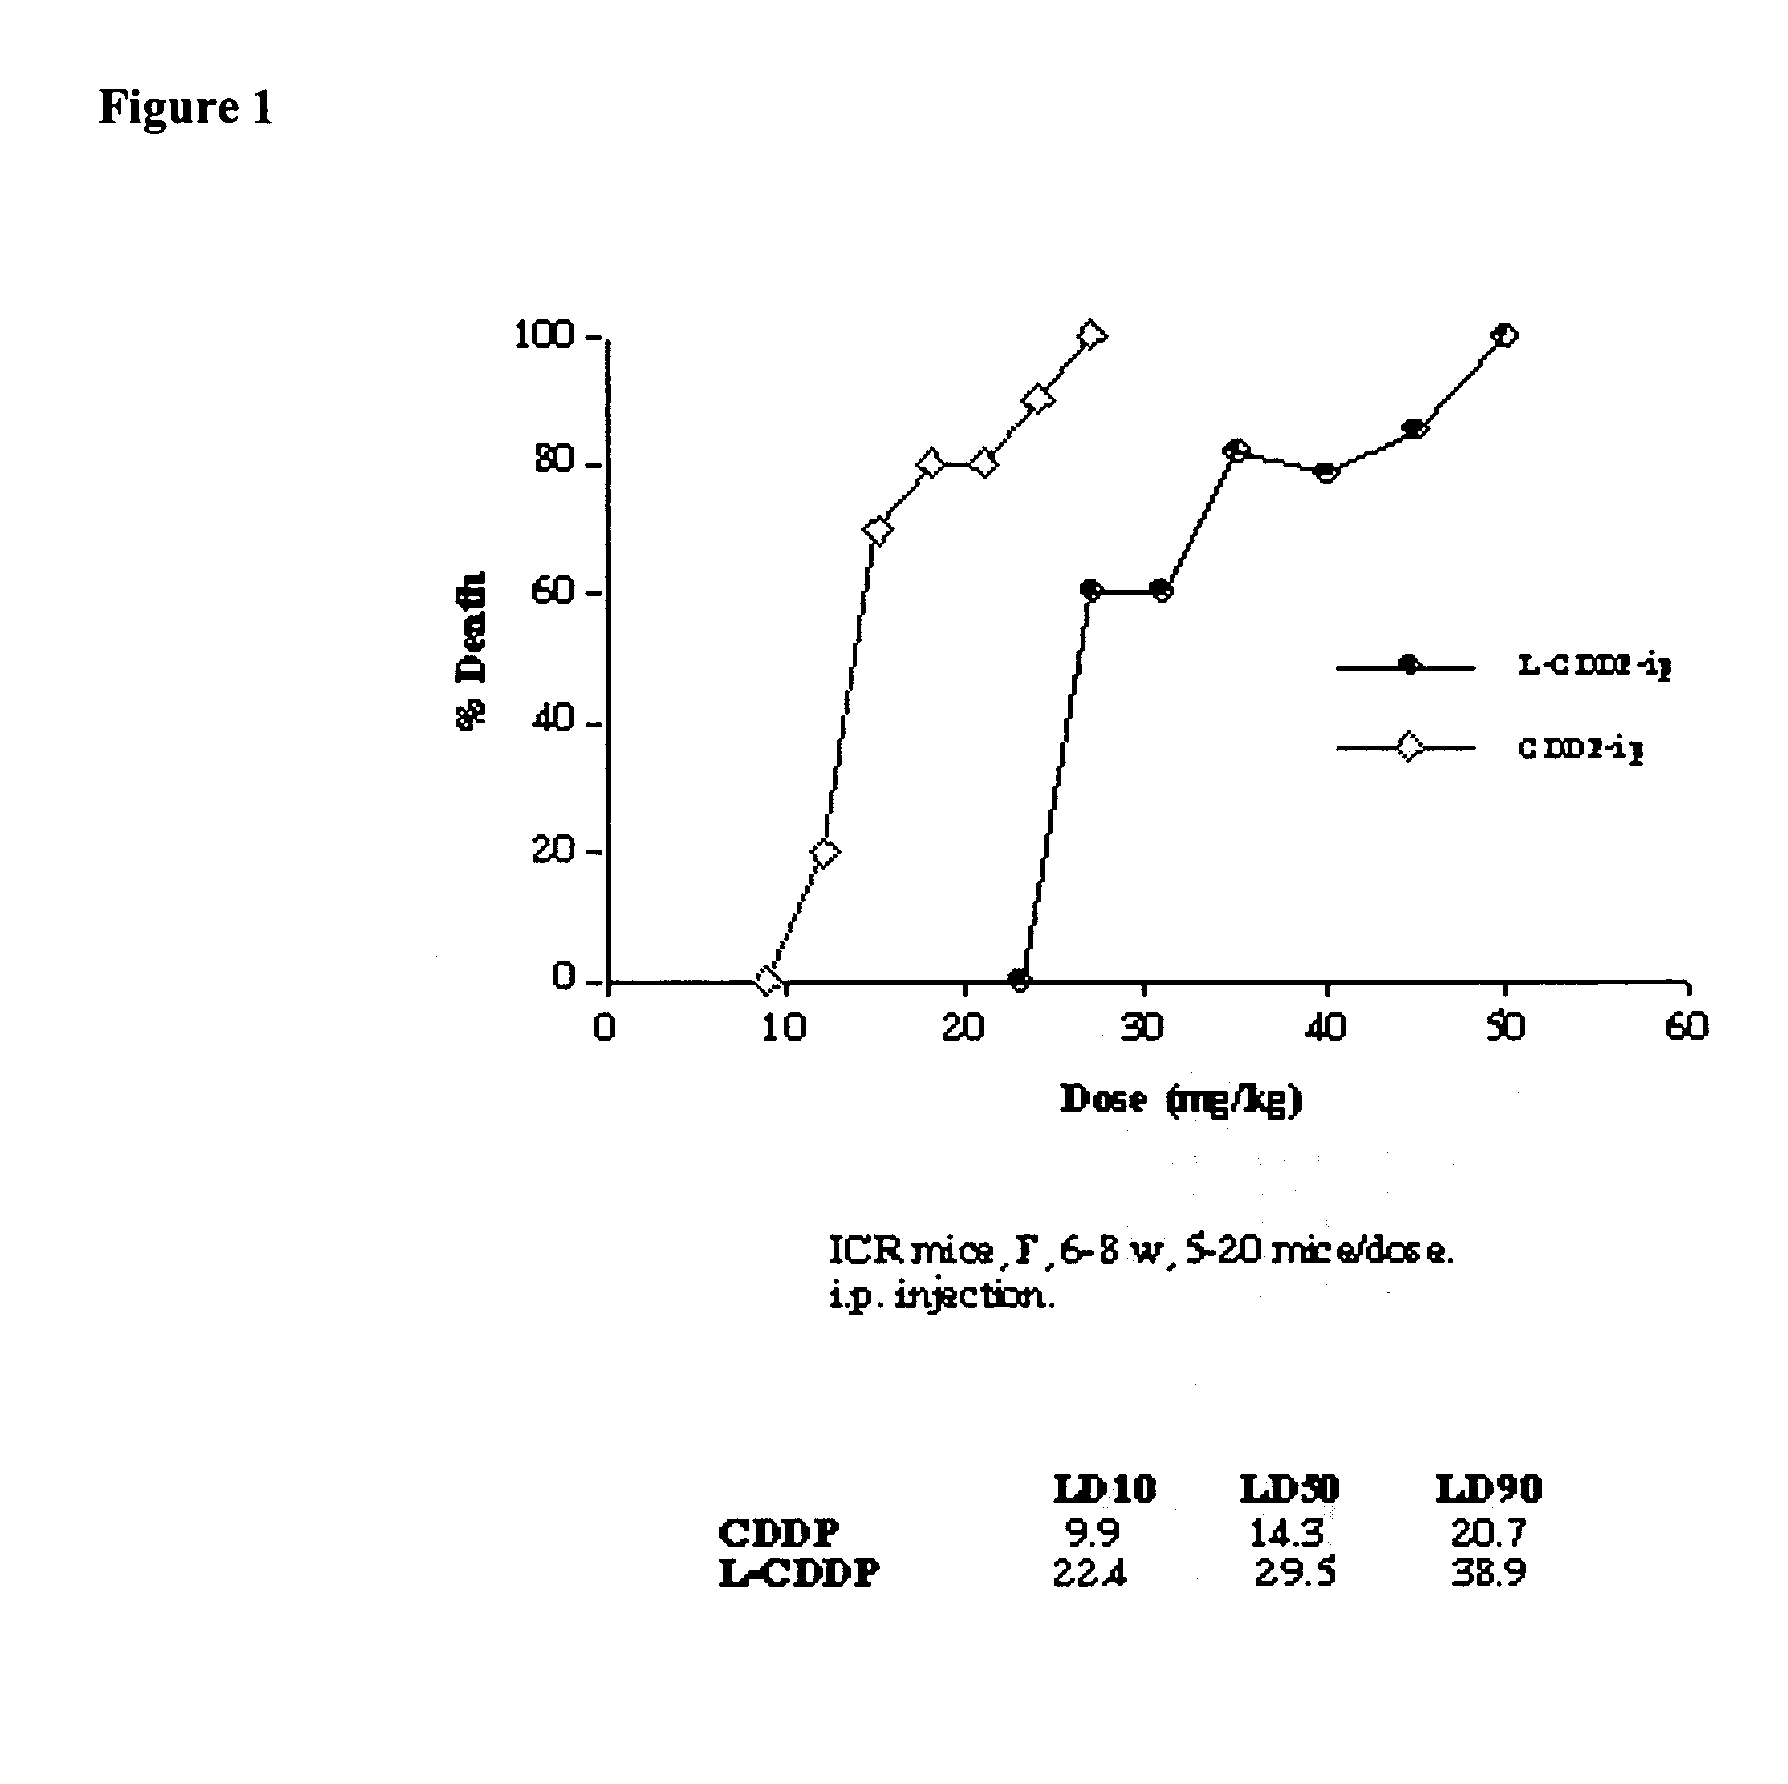 Methods of treating cancer with high potency lipid-based platinum compound formulations administered intraperitoneally